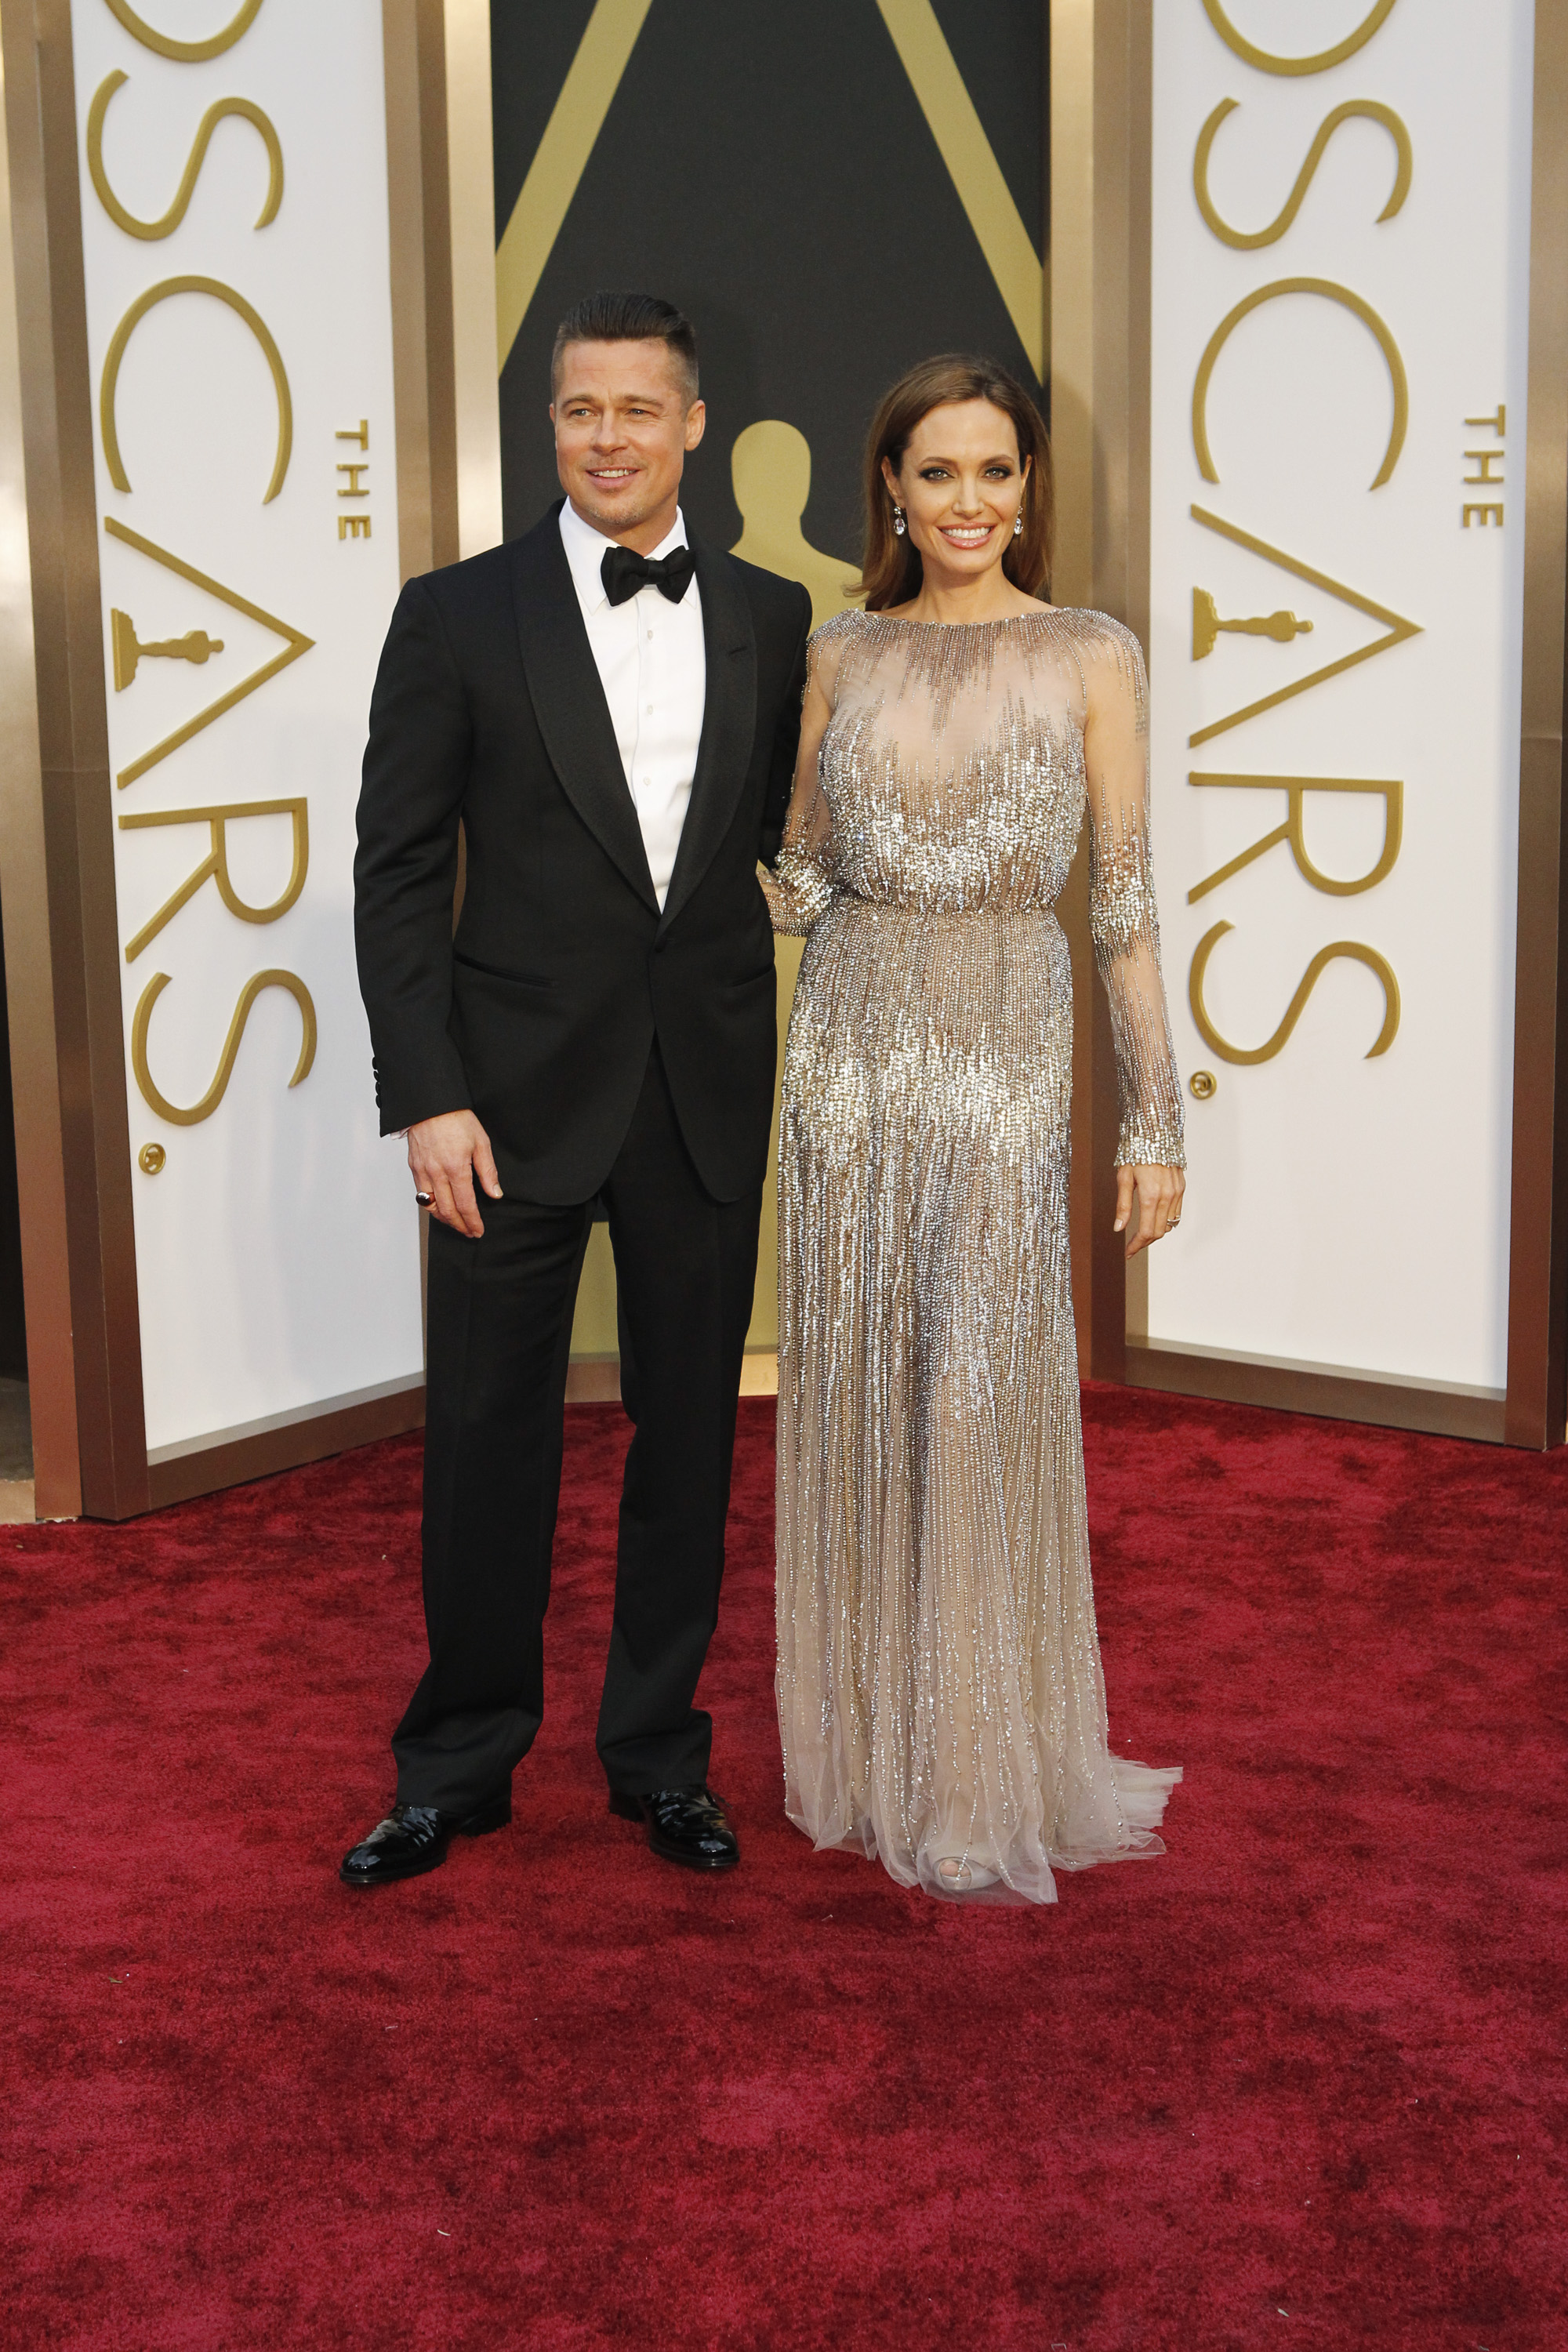 Angelina and her ex-husband Brad Pitt posed on the red carpet in March 2013